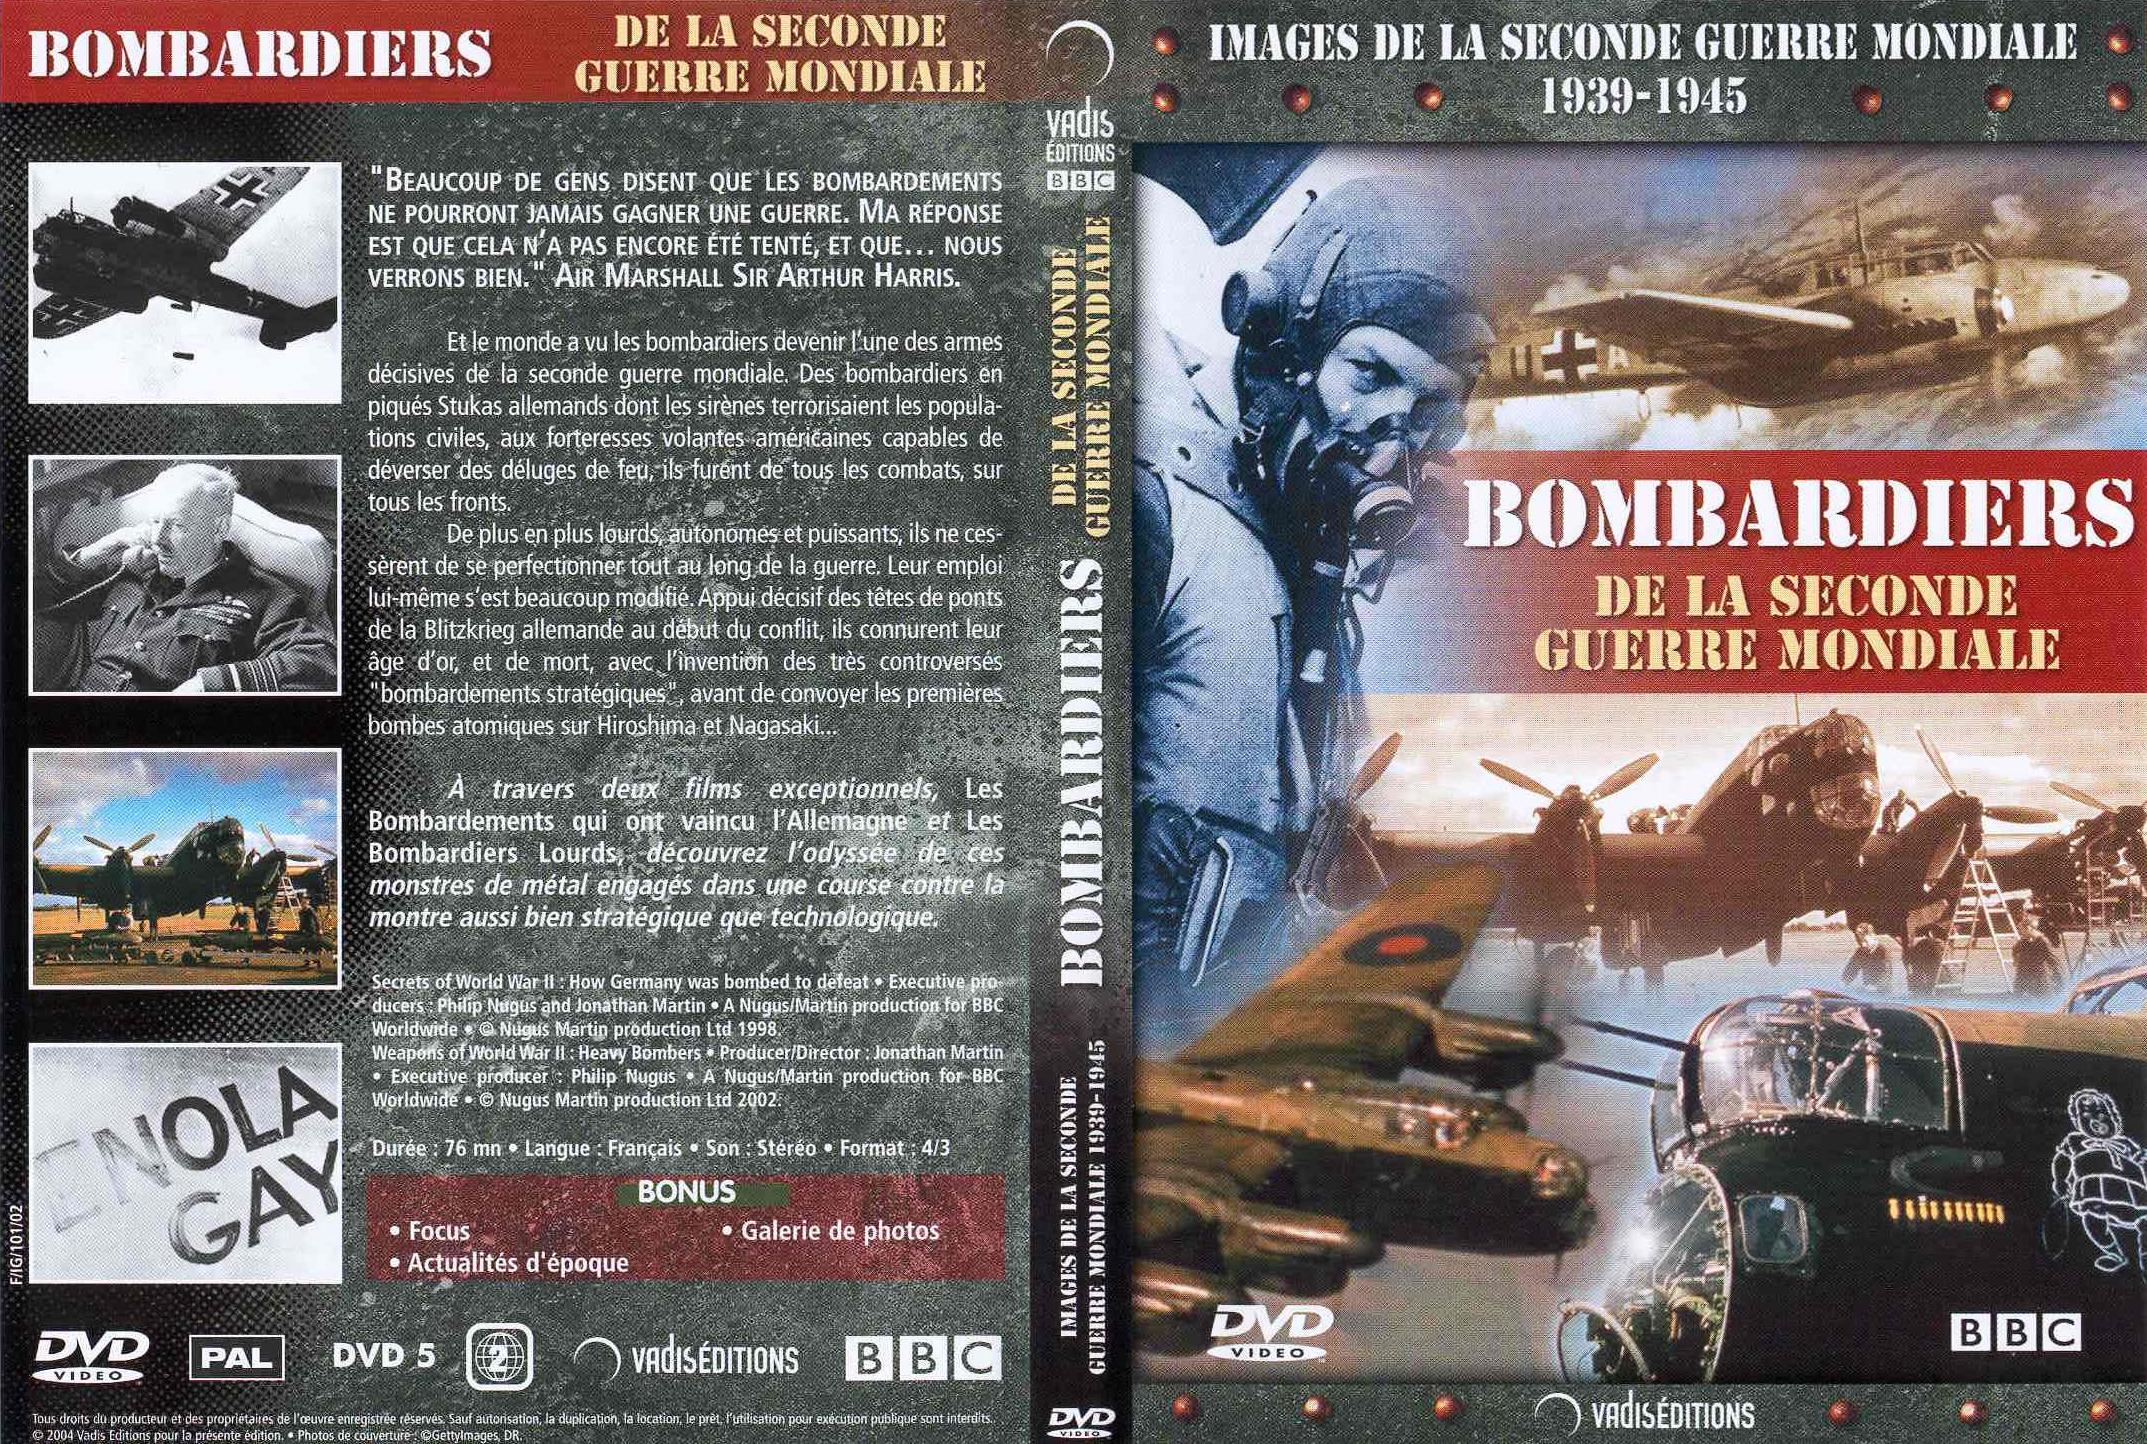 Jaquette DVD 1939-1945 Bombardiers